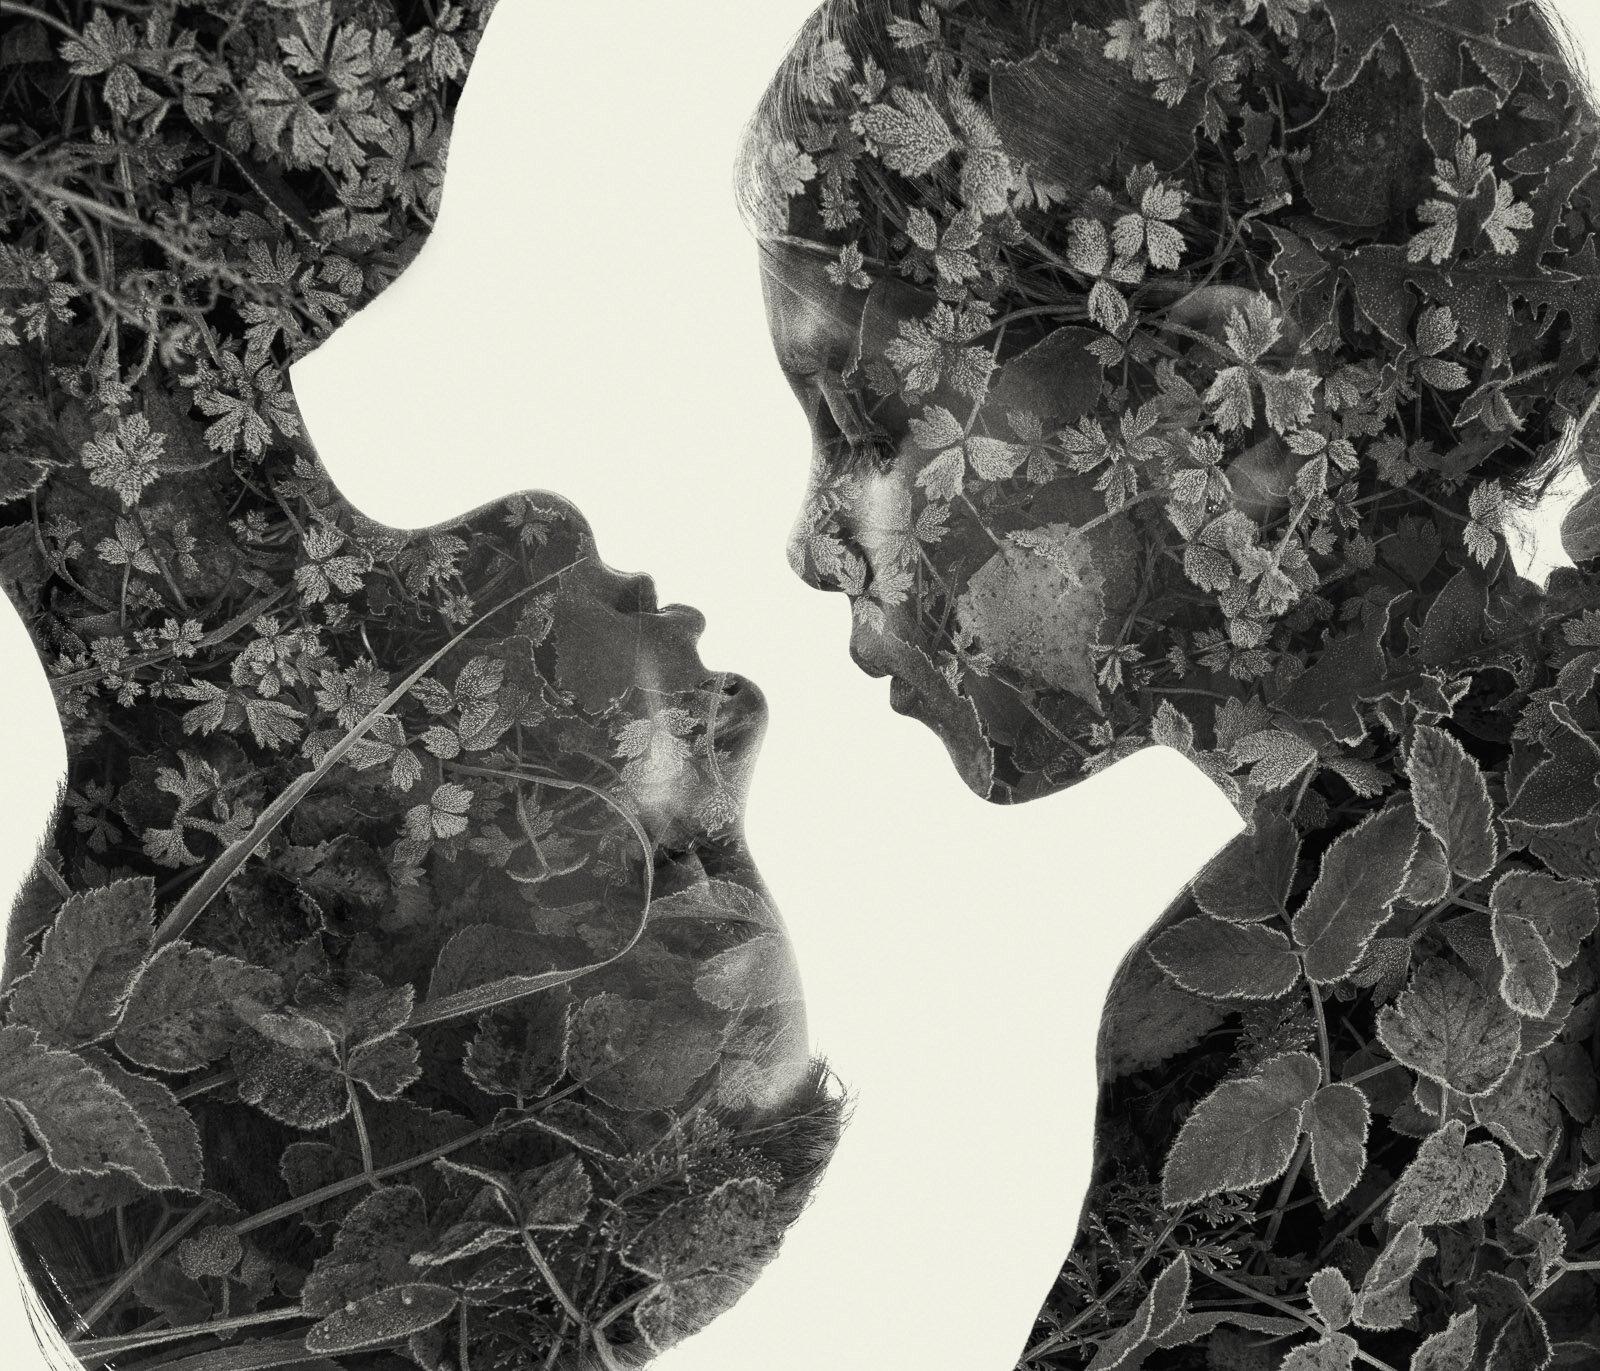 Christoffer Relander Black and White Photograph - Blood ties - black and white portrait and nature multi exposure photograph